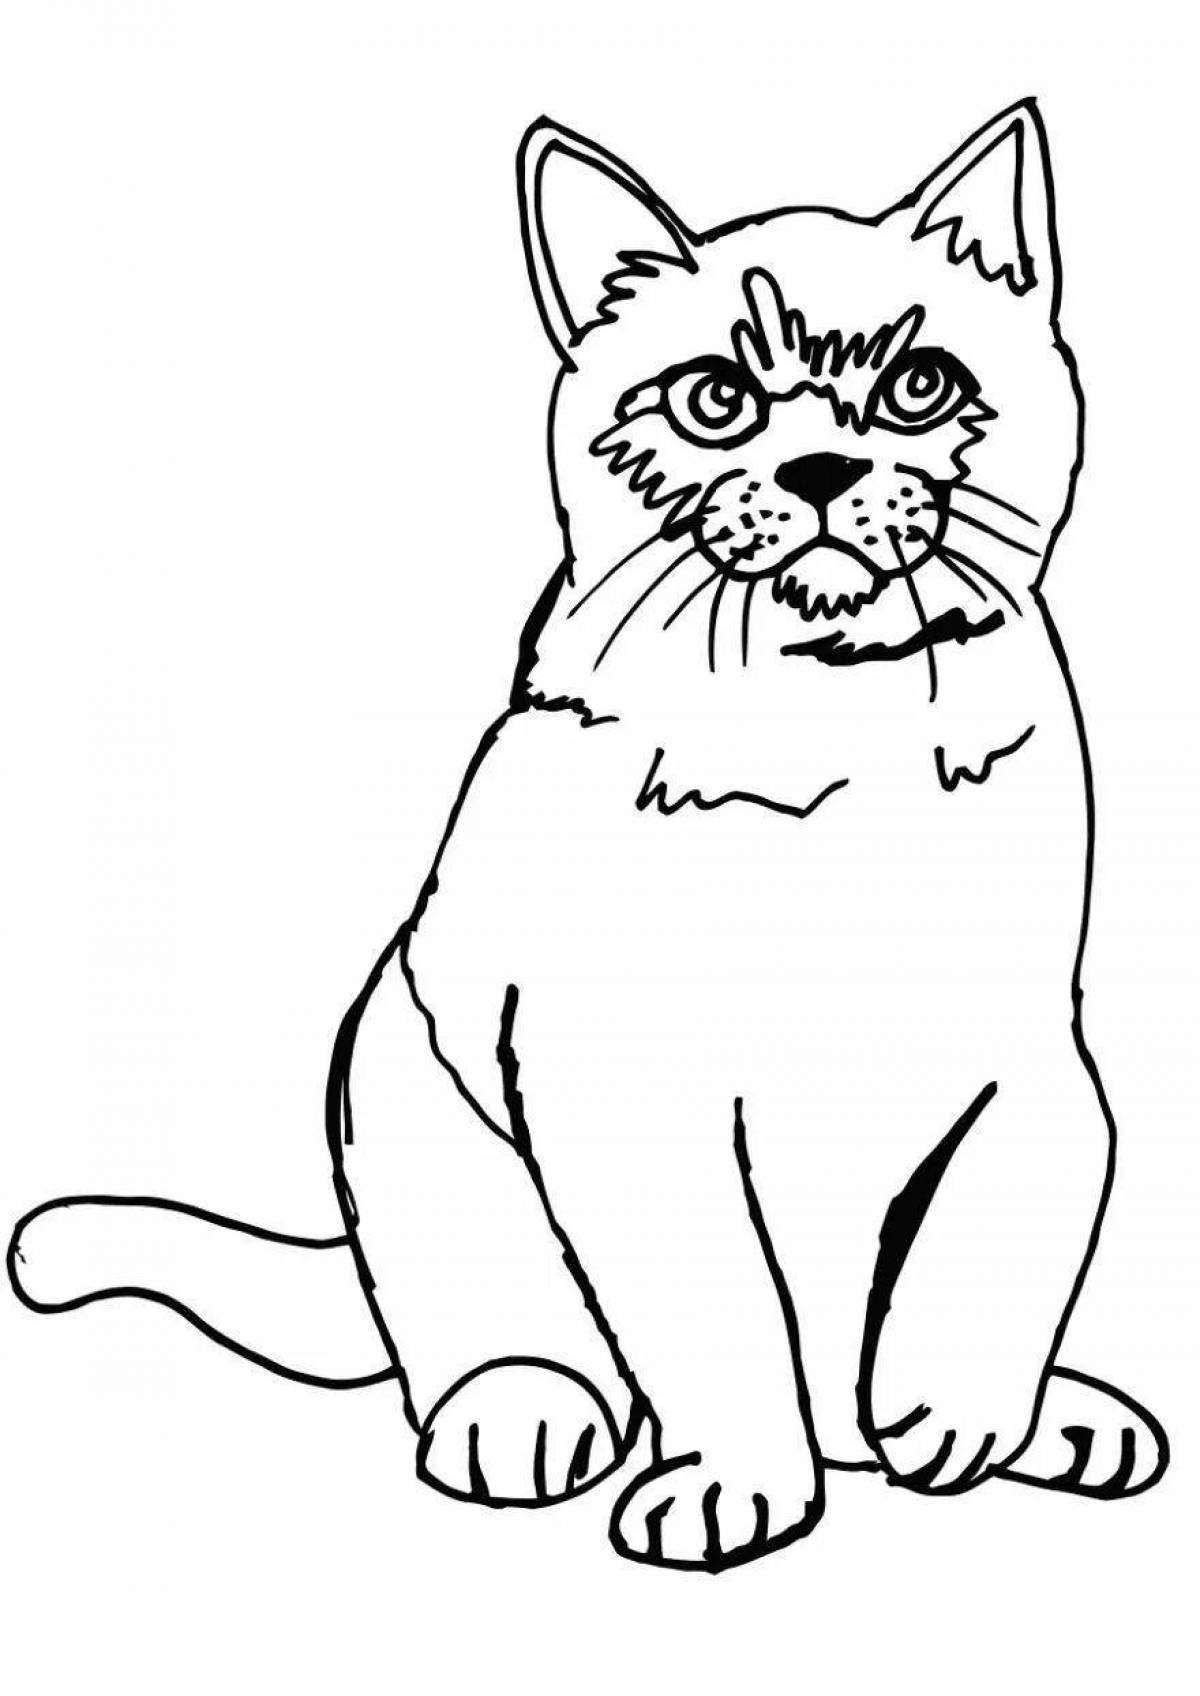 Tiny white cat coloring book